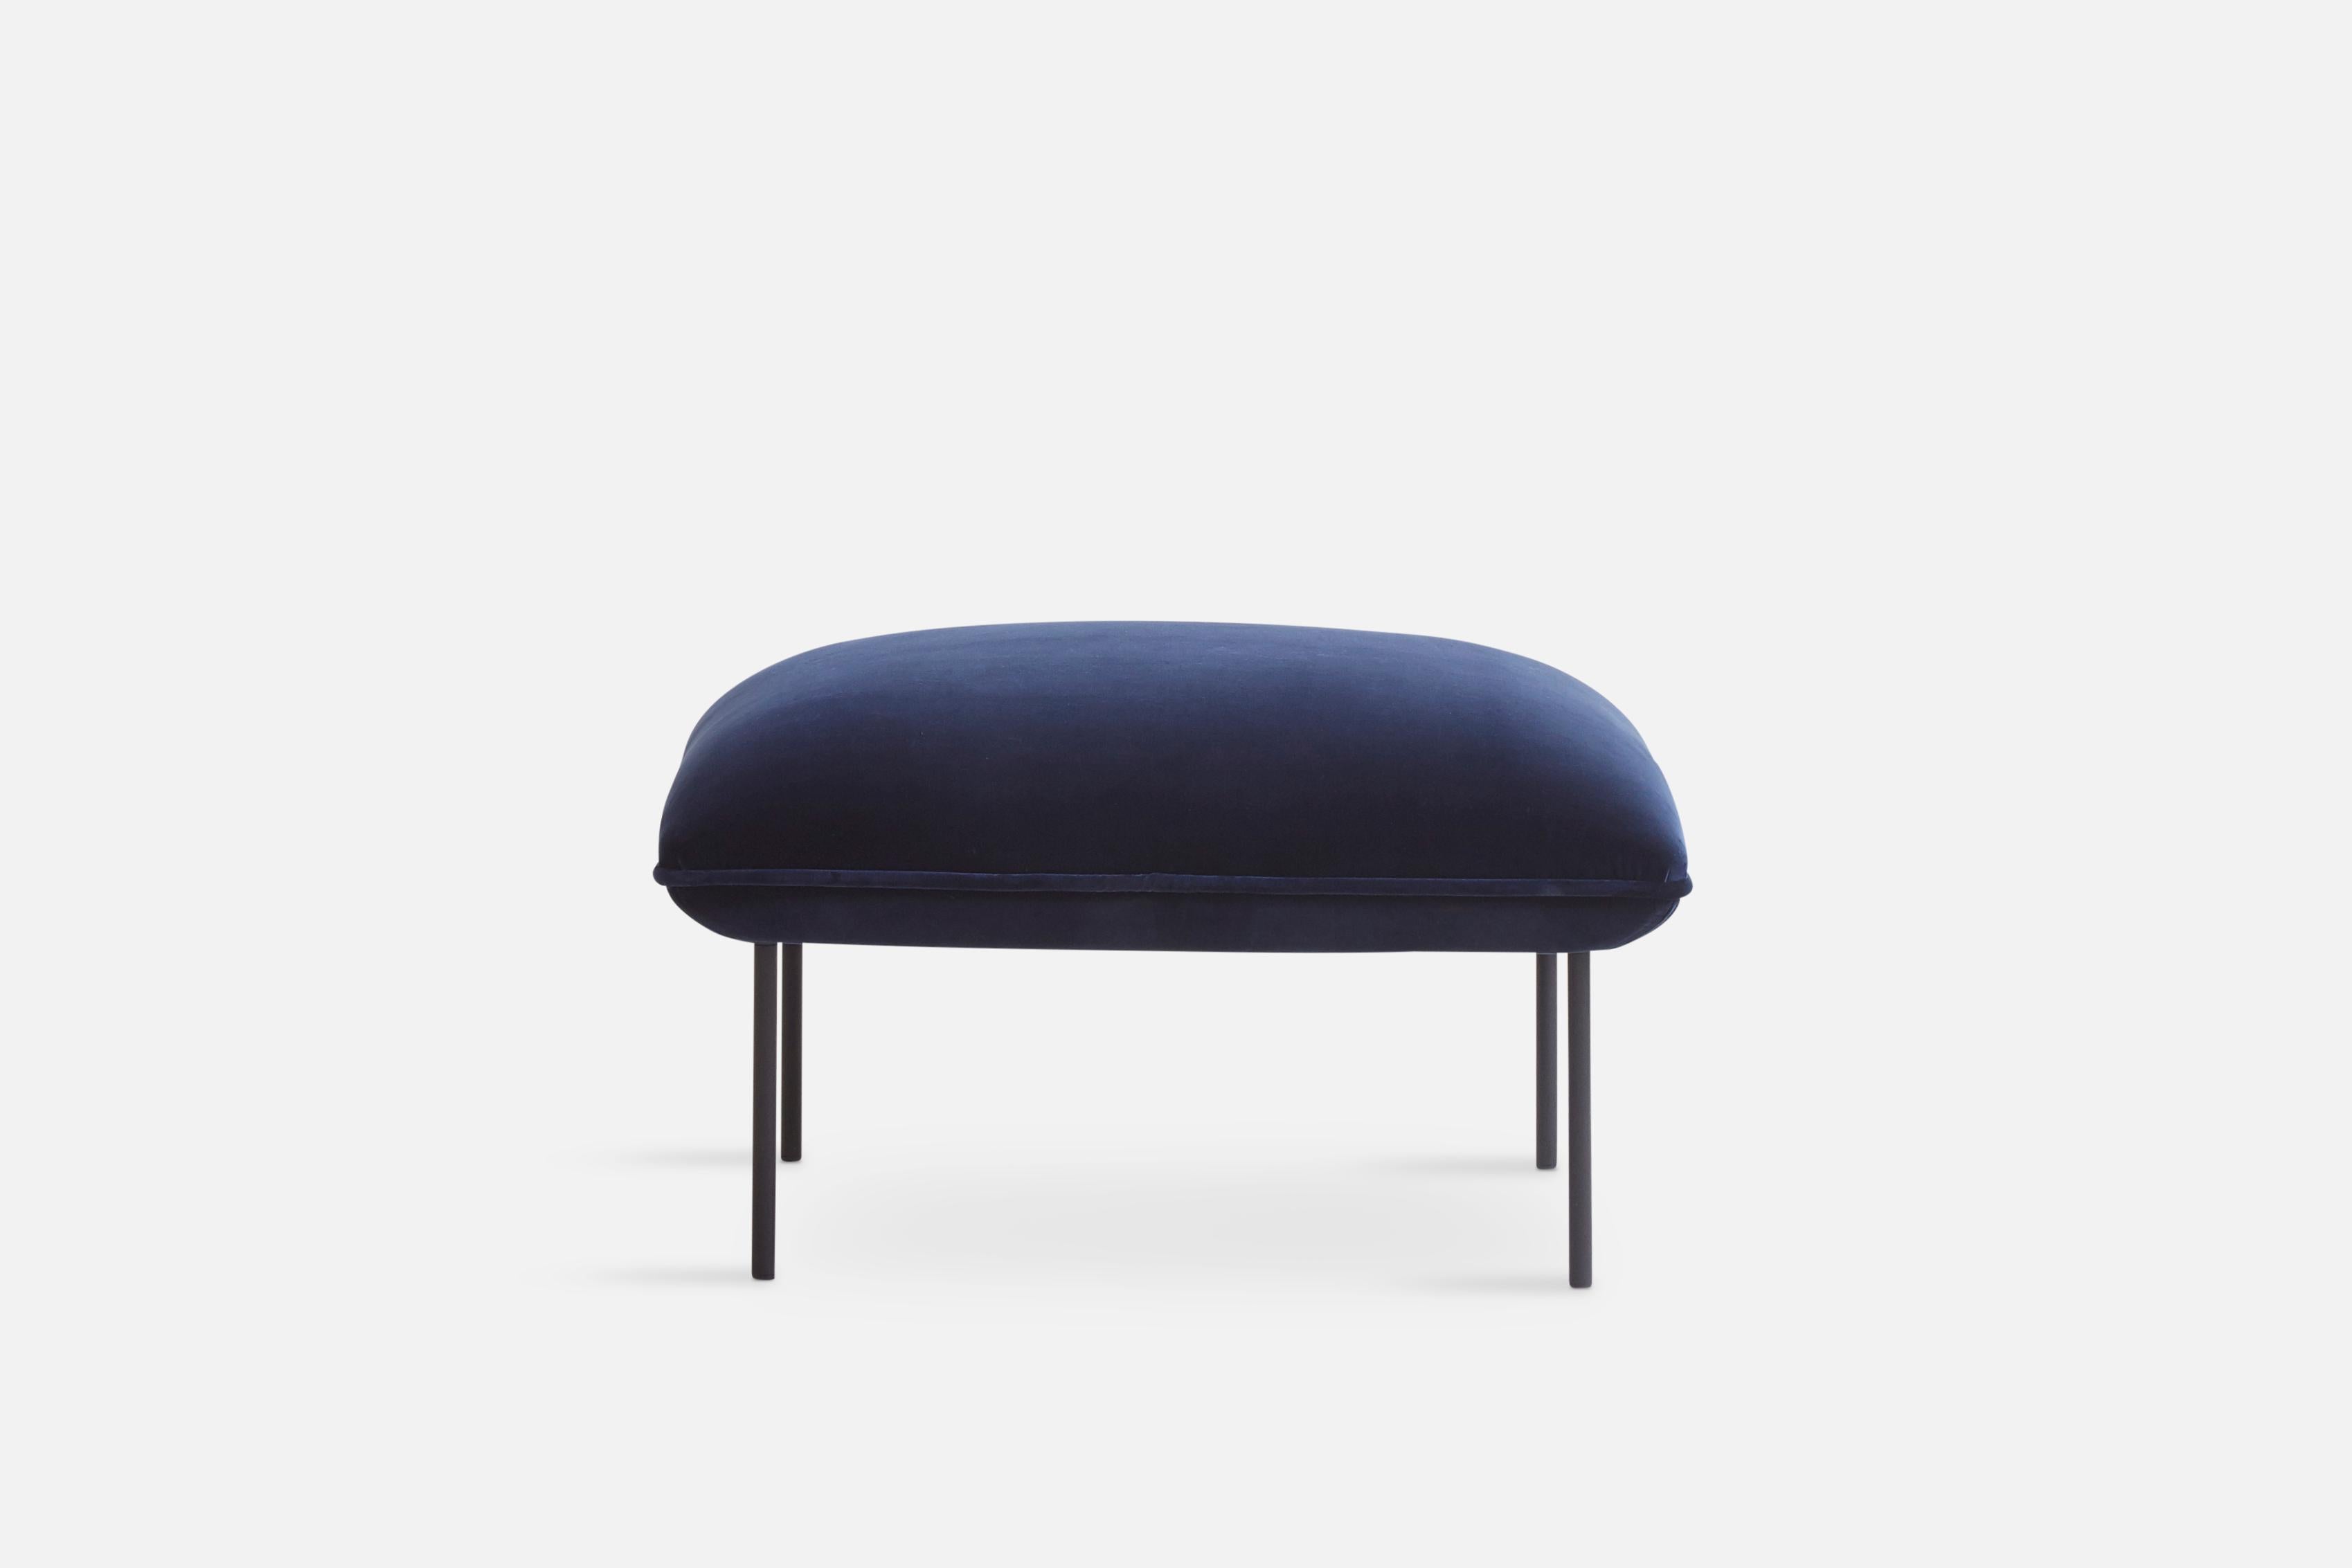 Nakki ottoman by Mika Tolvanen
Materials: Foam, Plywood, Elastic Belts, Memory Foam, Fabric (Harald 3, 0182)
Dimensions: D 80 x W 80 x H 46 cm
Also available in different colours and materials. 

The founders, Mia and Torben Koed, decided to